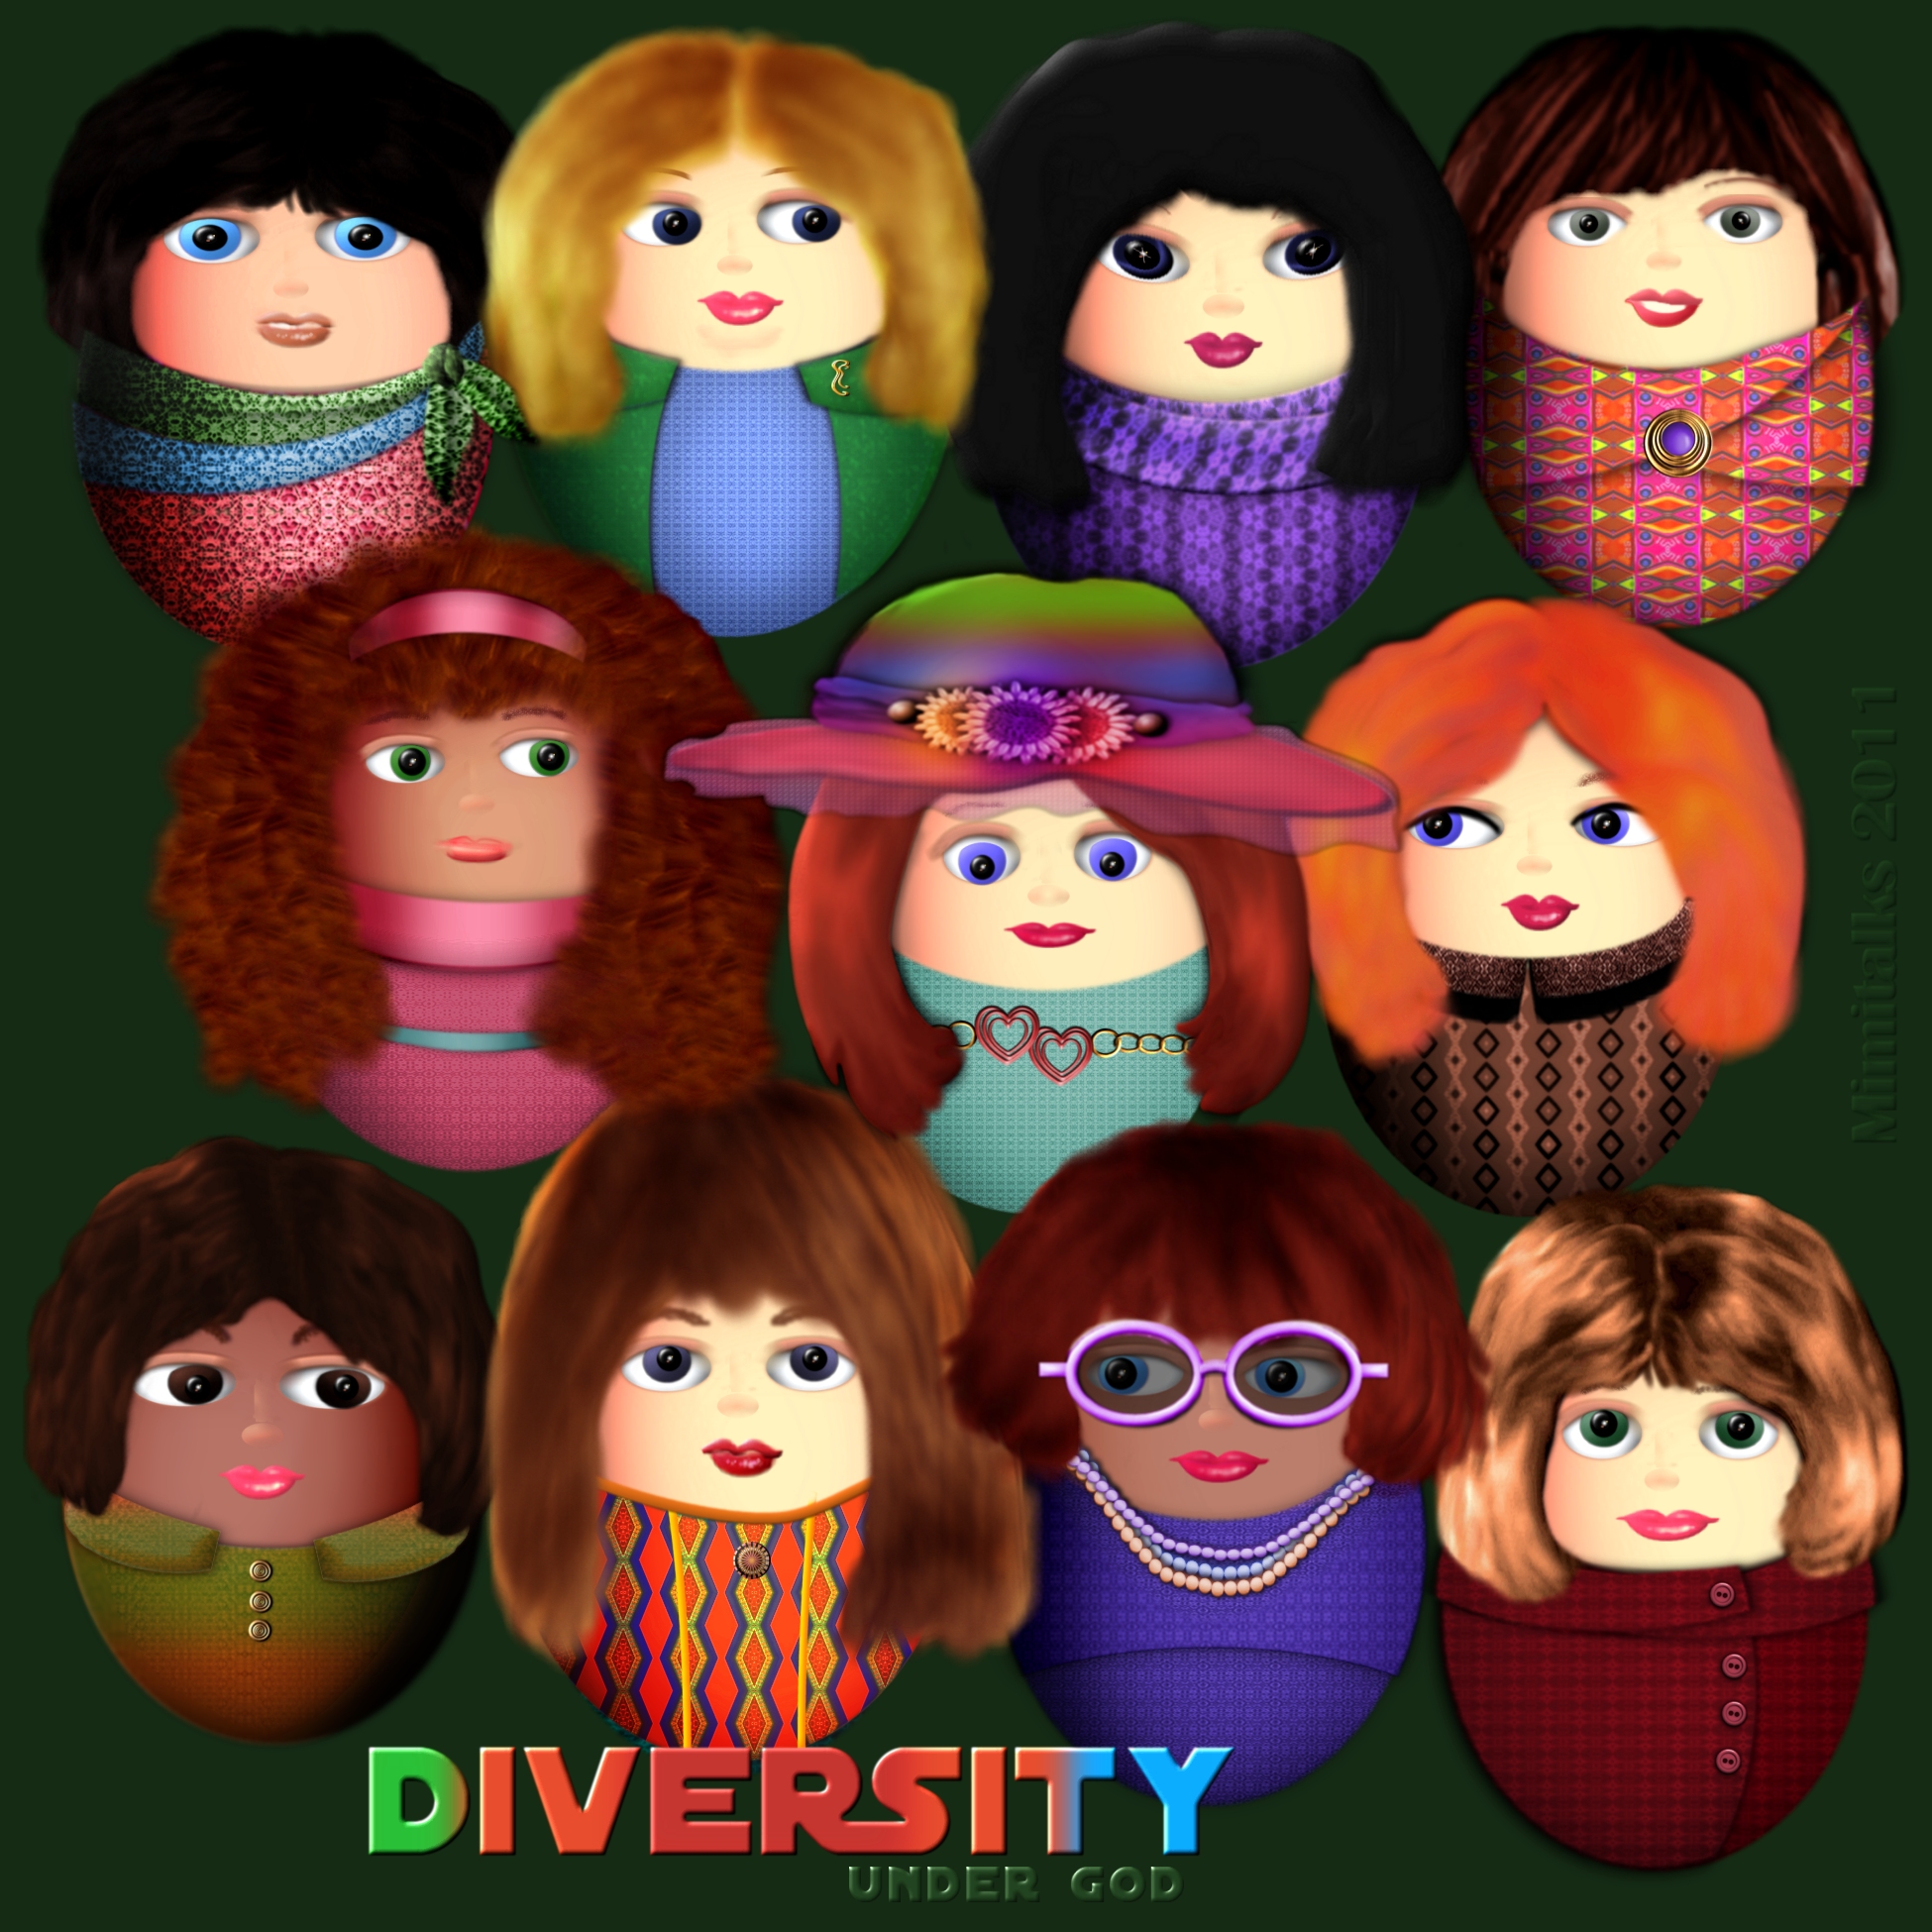 Diversity under God - by Mimitalks, inspired by events of this week